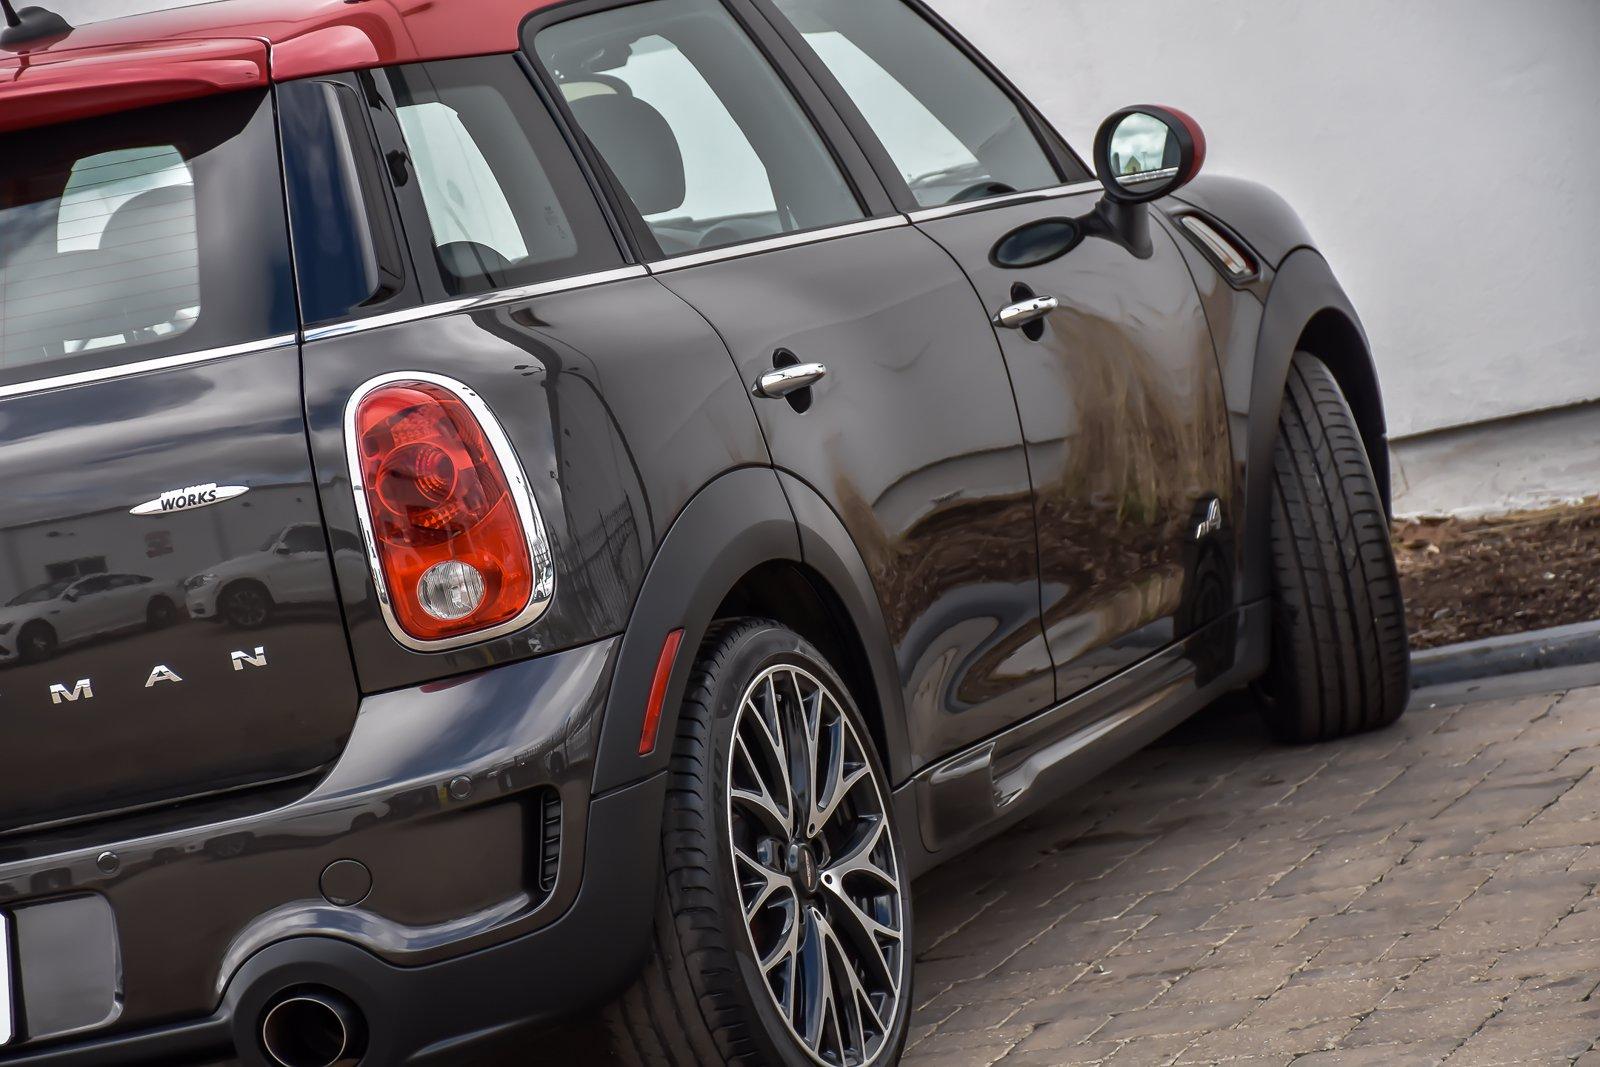 Used 2016 MINI Cooper Countryman John Cooper Works Premium With Navigation | Downers Grove, IL